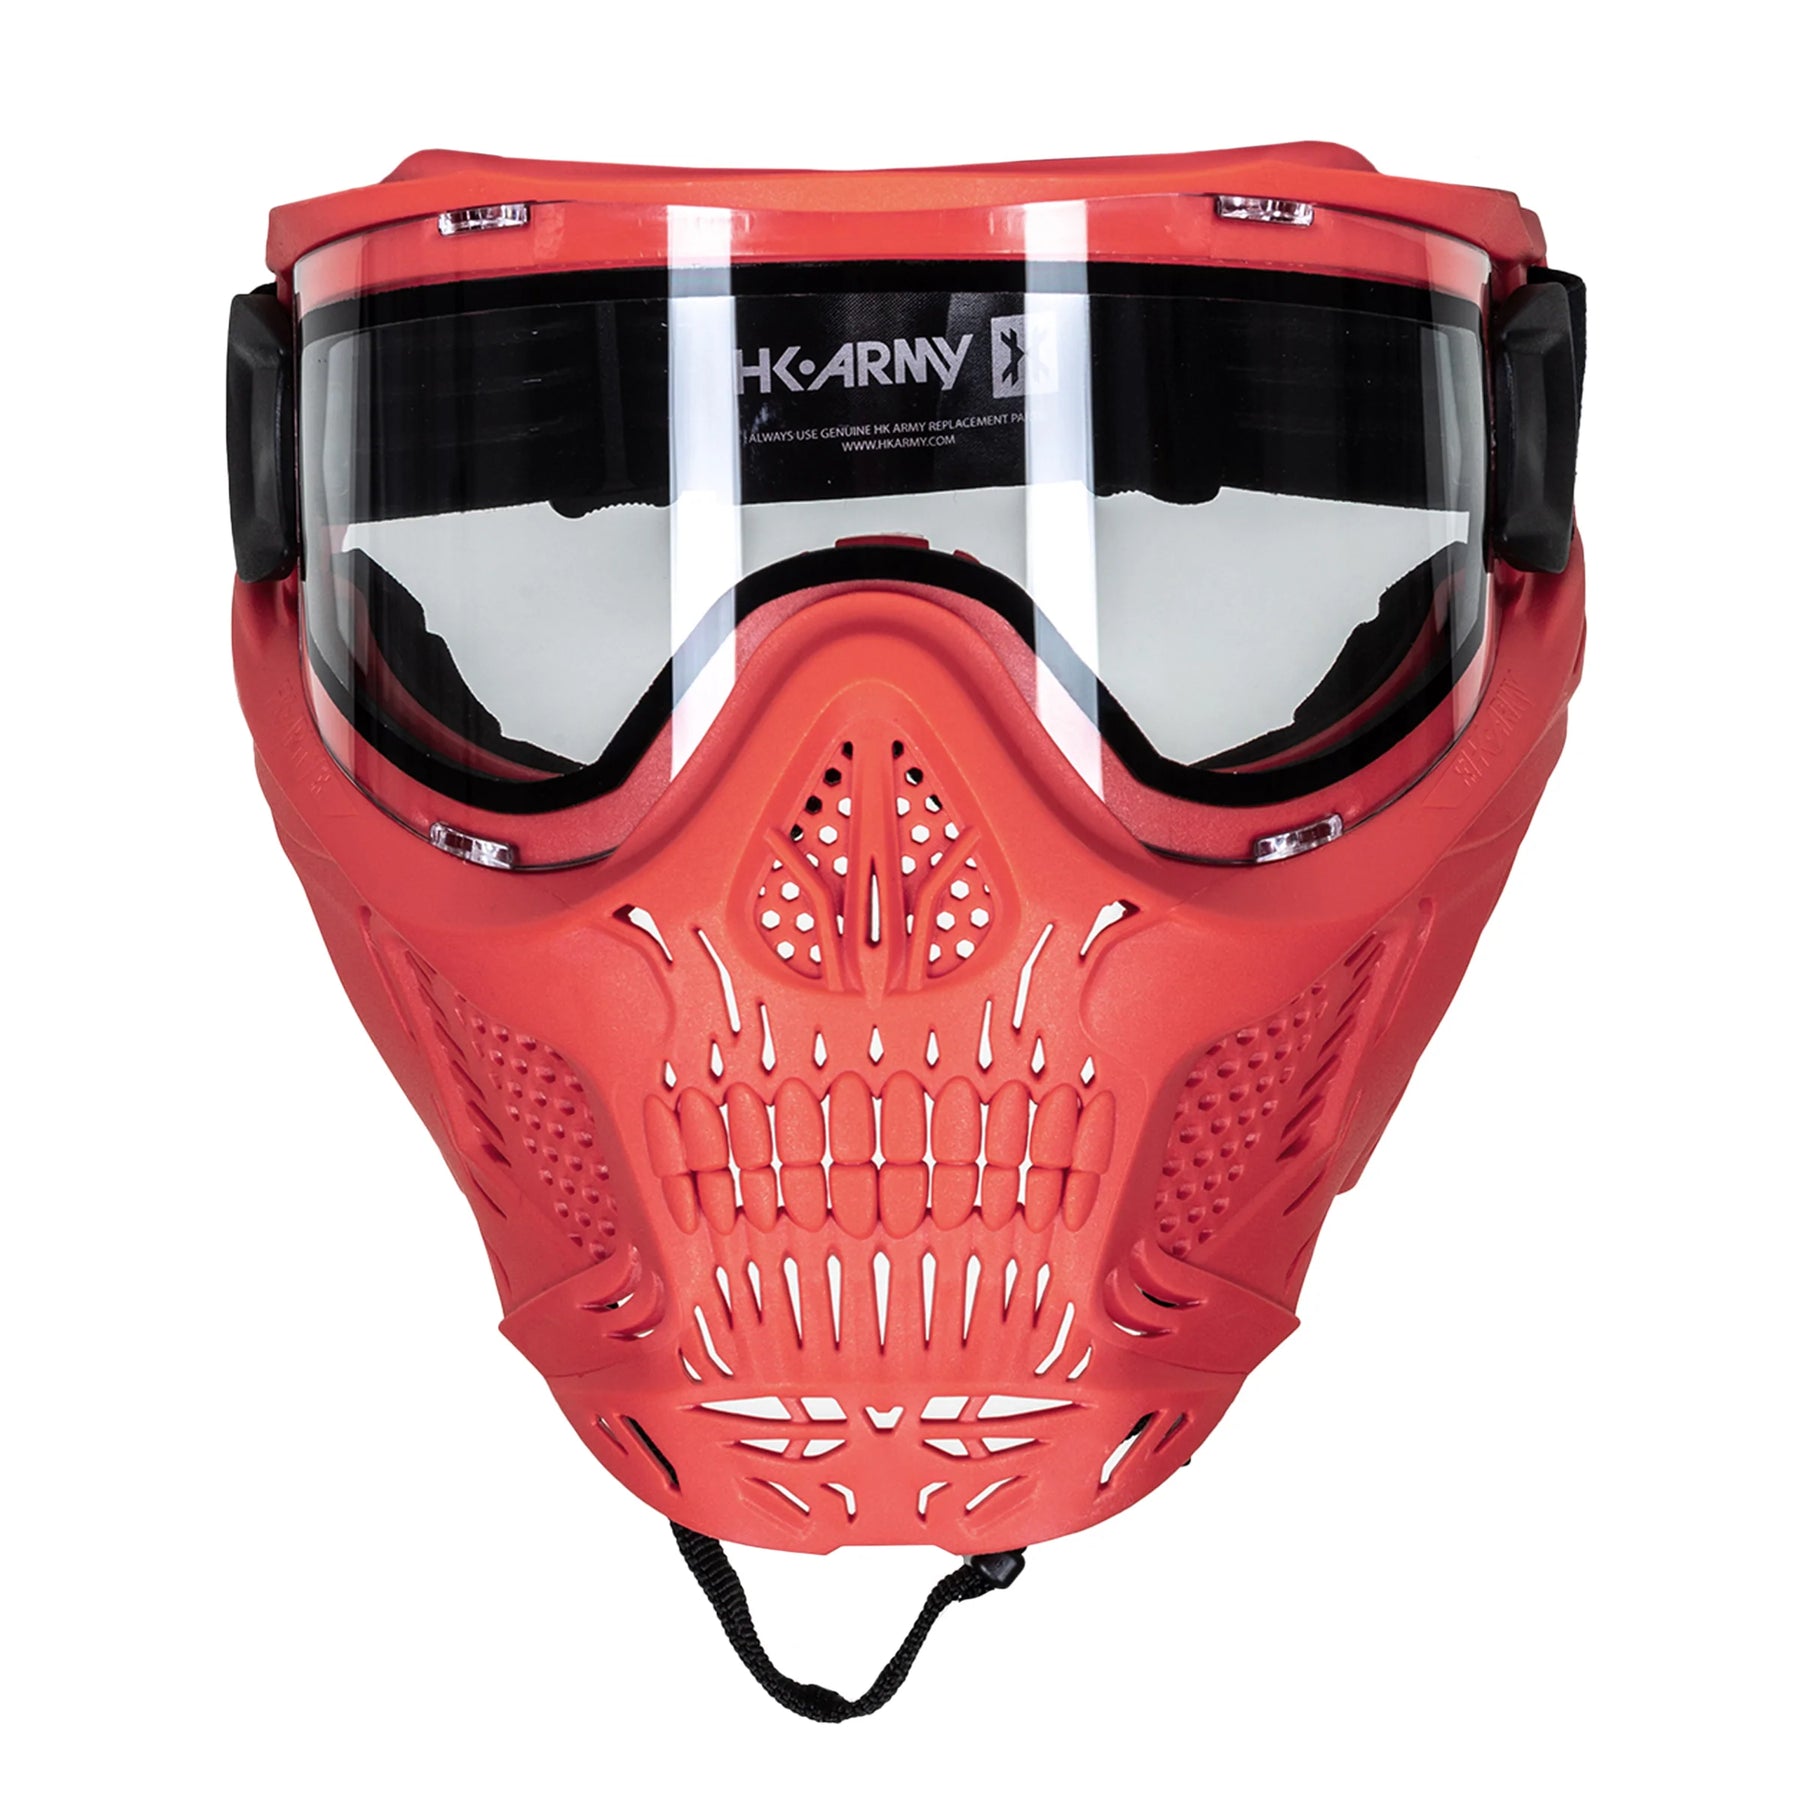 Hstl Skull Goggle - Red W/ Clear Lens | Paintball Goggle | Mask | Hk Army